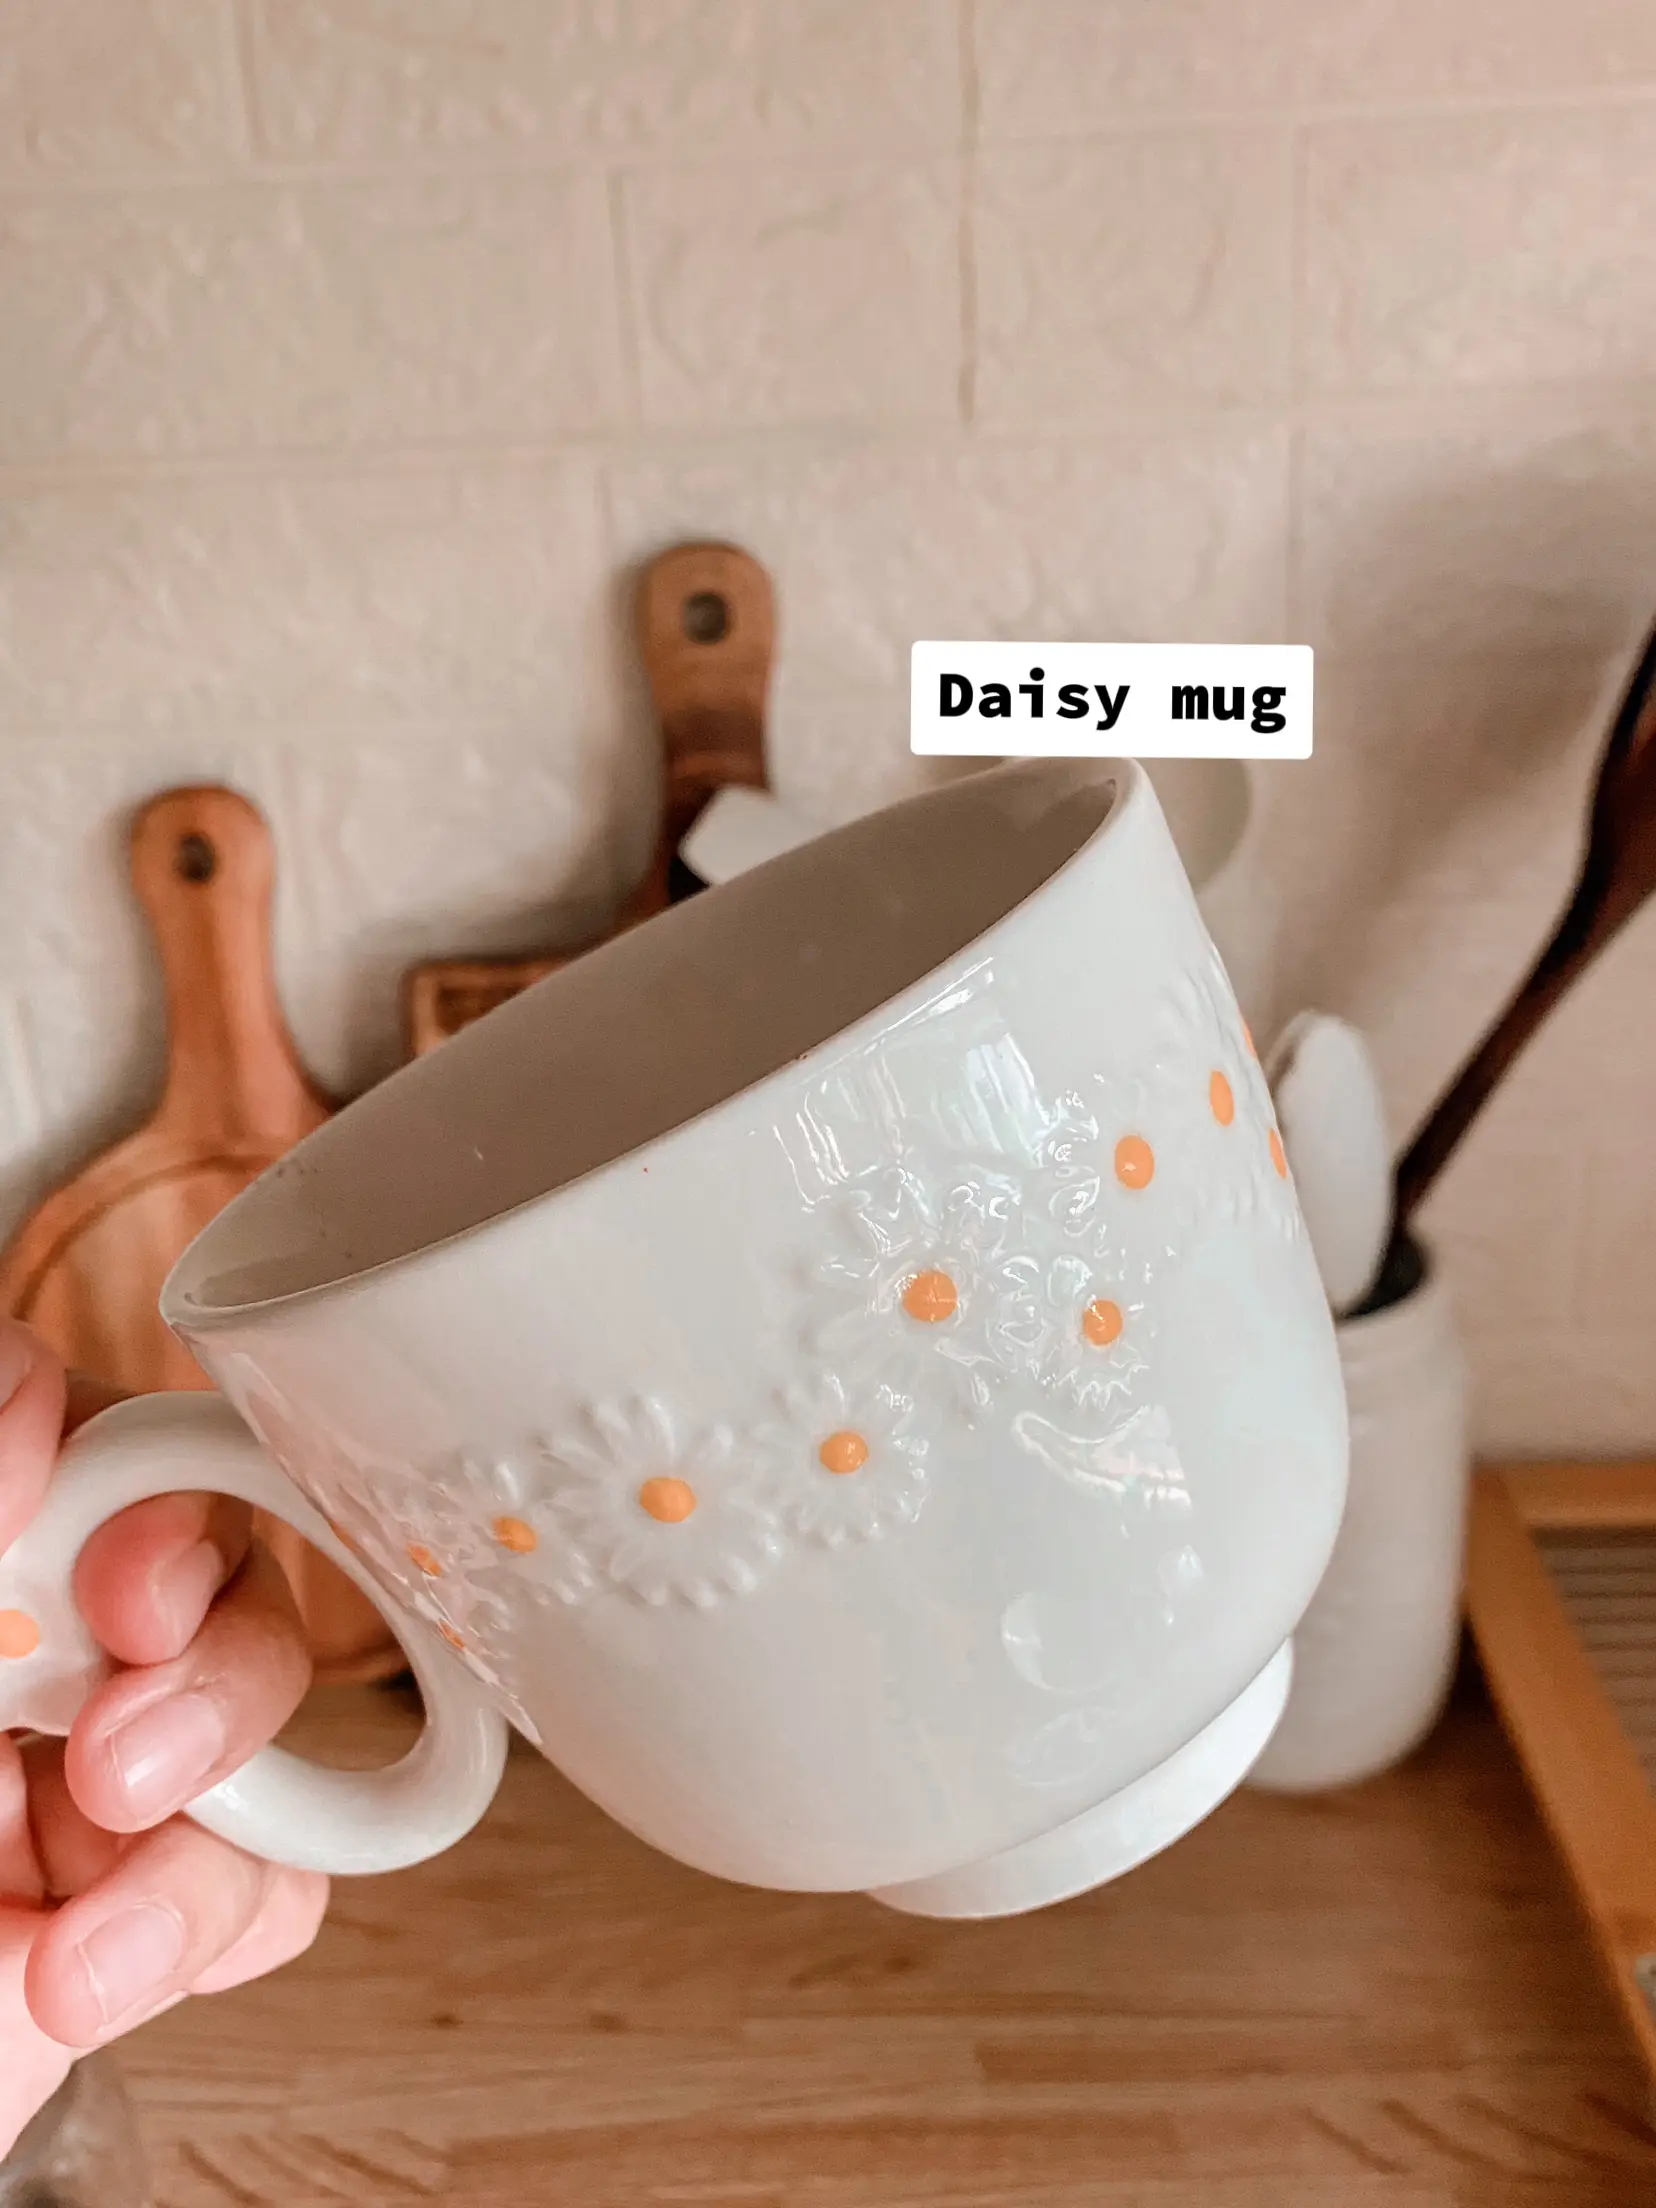 Cute aesthetic mug 🍂🕊, Gallery posted by Raracosyhome